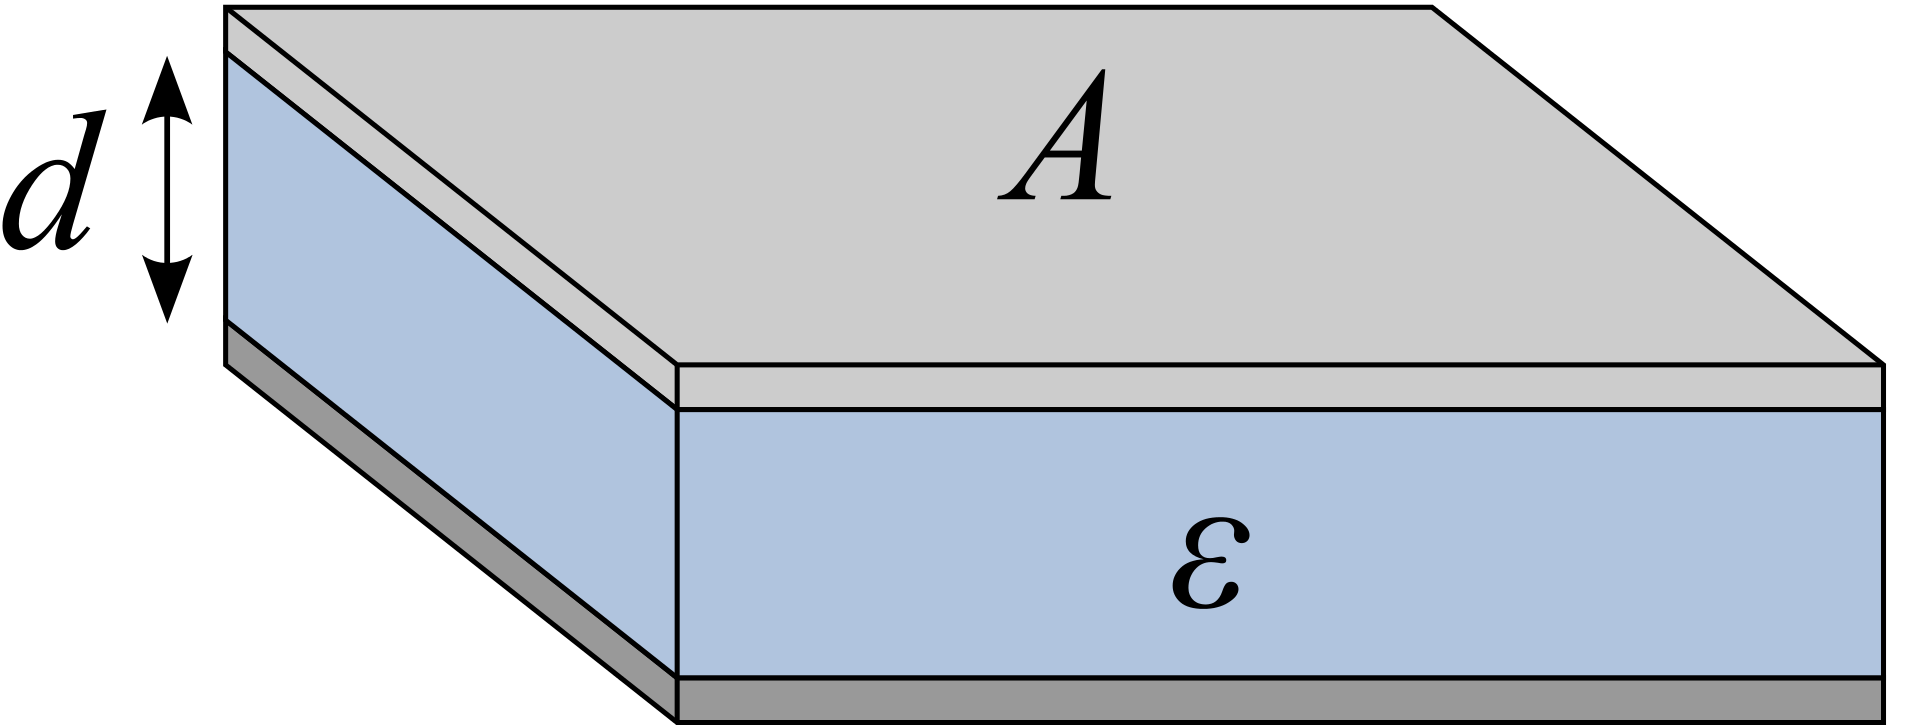 Illustration of a simple parallel-plate capacitor